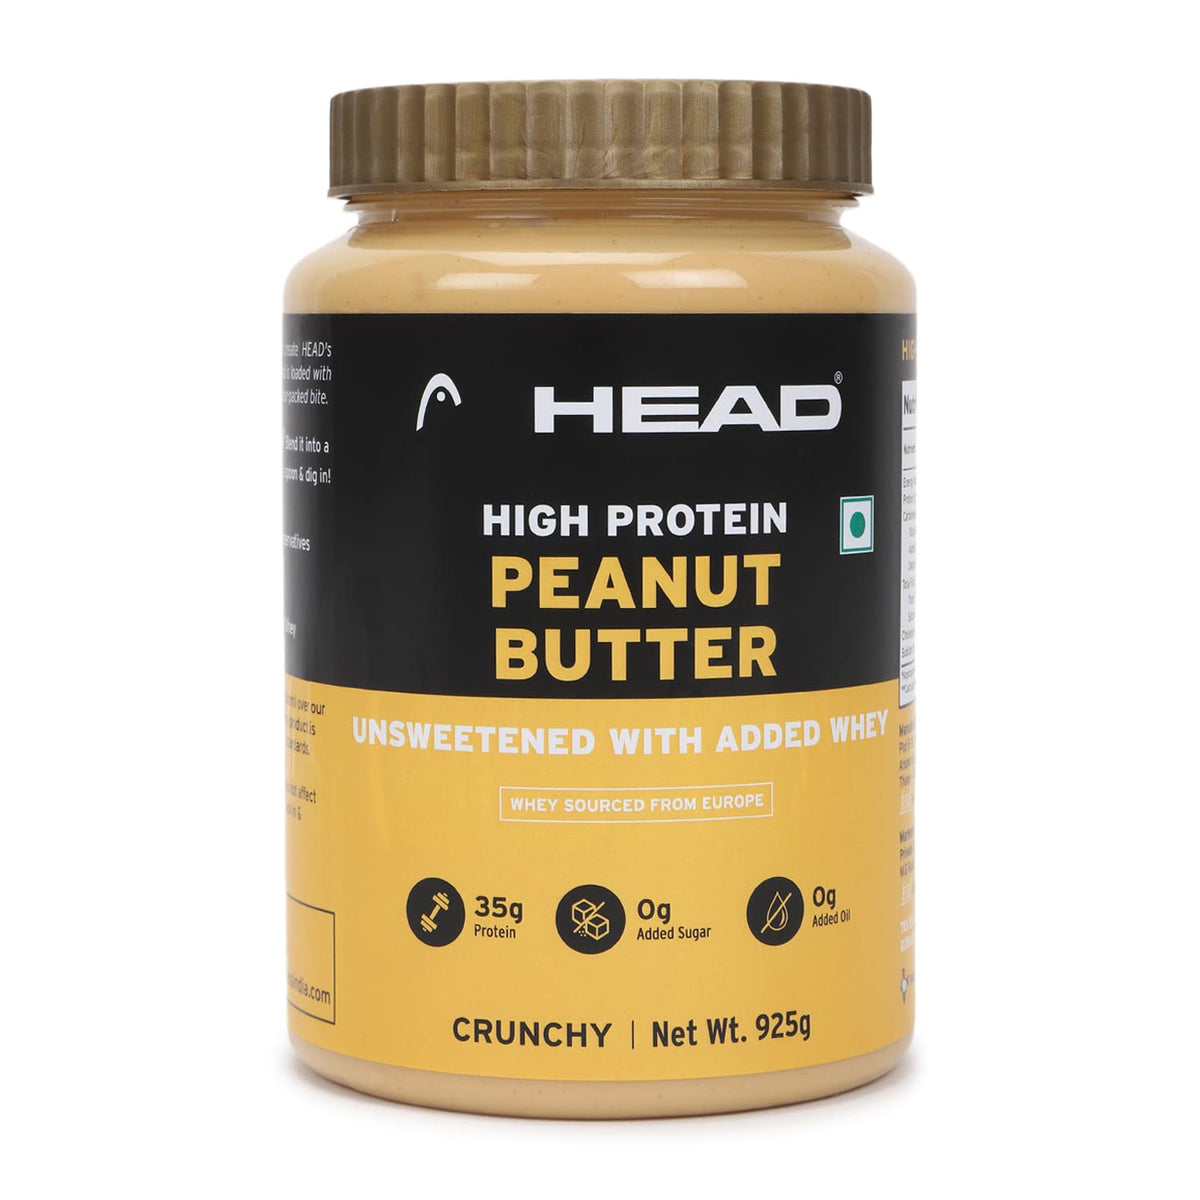 Head High Protein Peanut Butter (925g, Unsweetened, Crunchy) | 100% Pure Nuts | Added Whey | Protein Rich Nutritious Snack